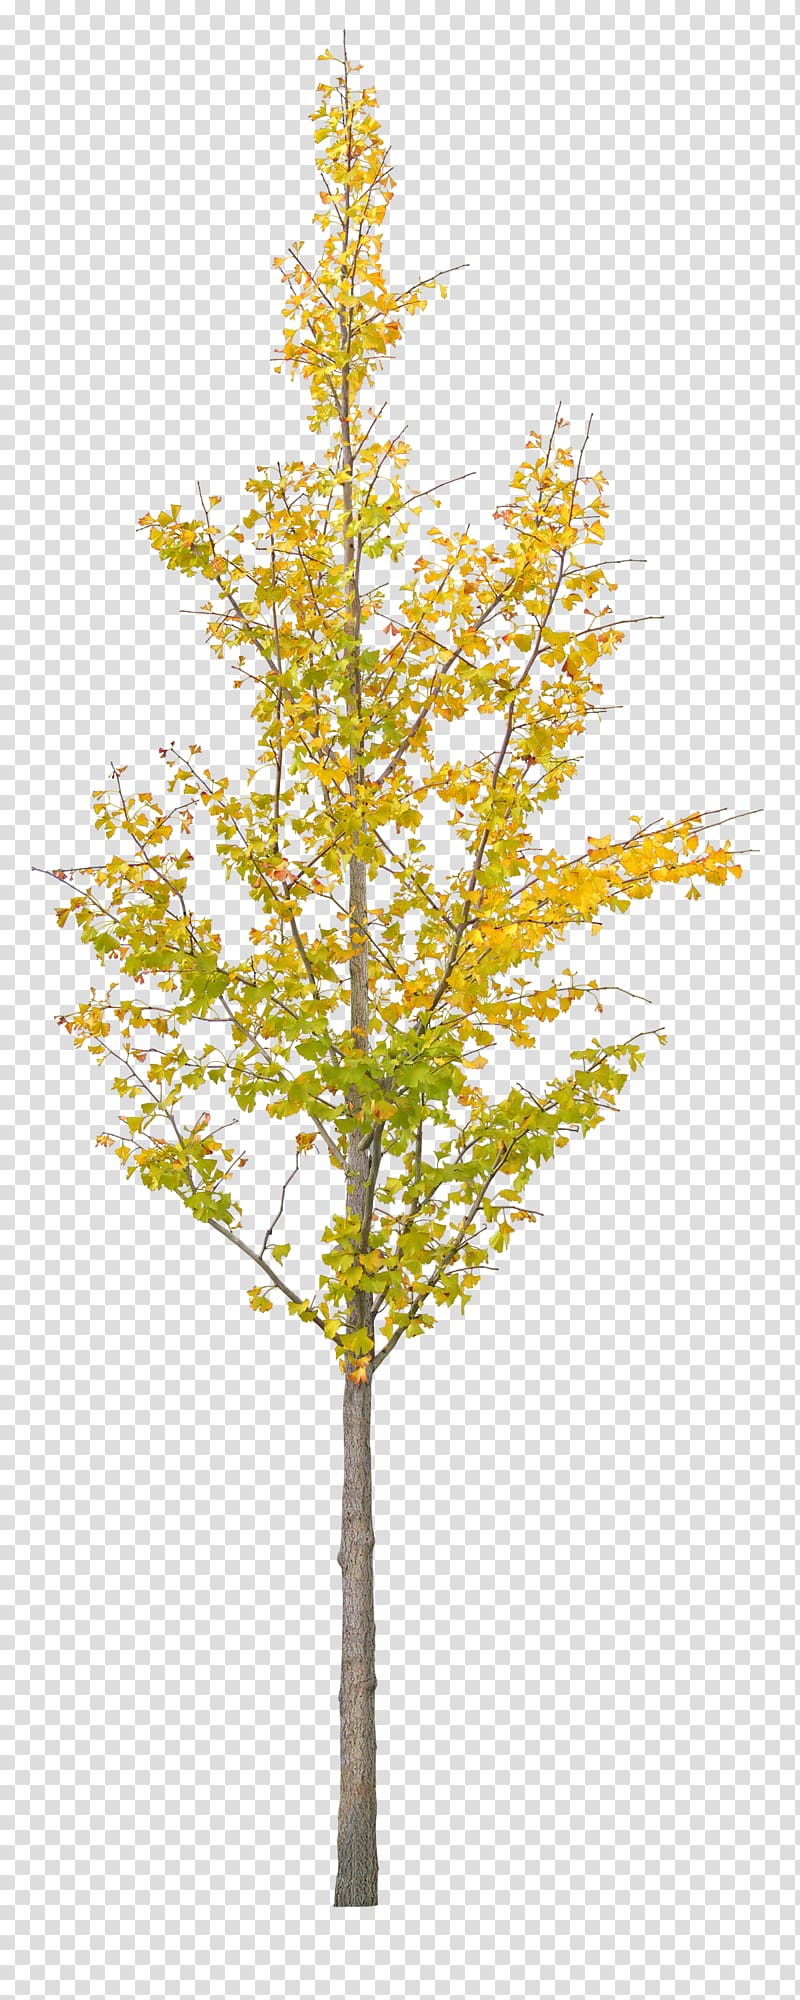 green leafed tree, Ginkgo biloba Tree, A ginkgo tree transparent background PNG clipart